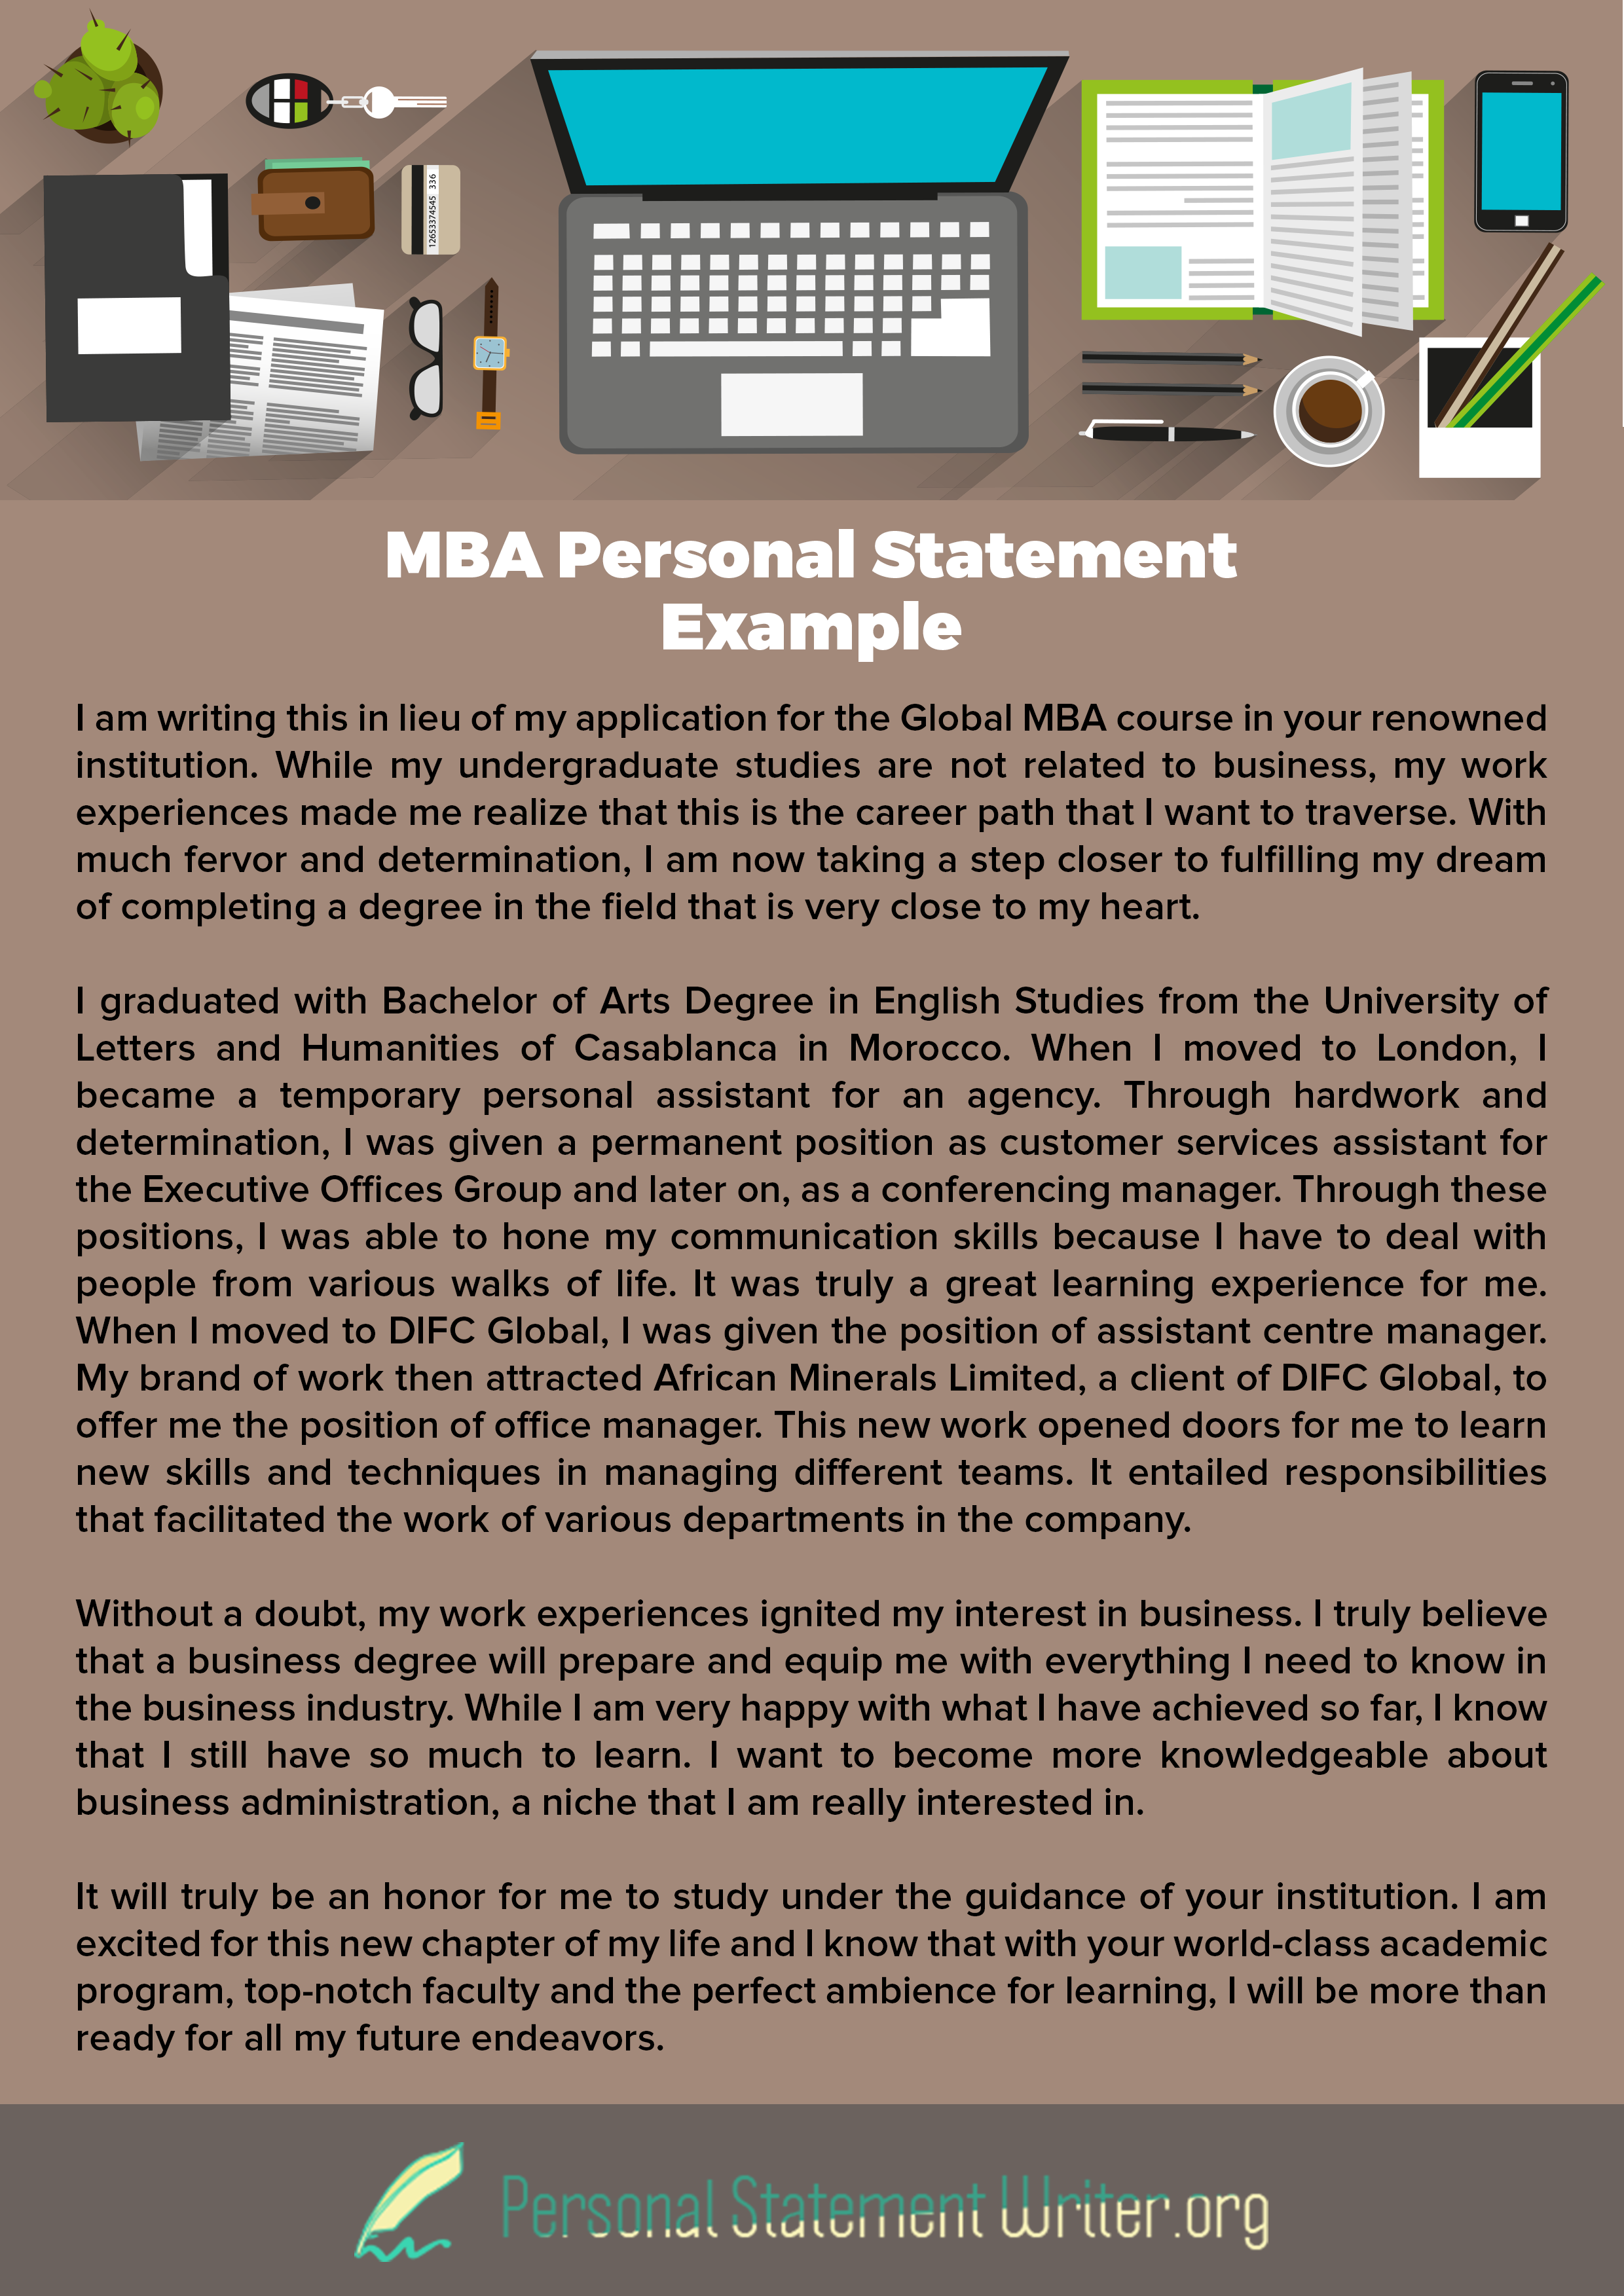 MBA Personal Statement Tips and a Sample Essay - mbaMission - MBA  Admissions Consulting